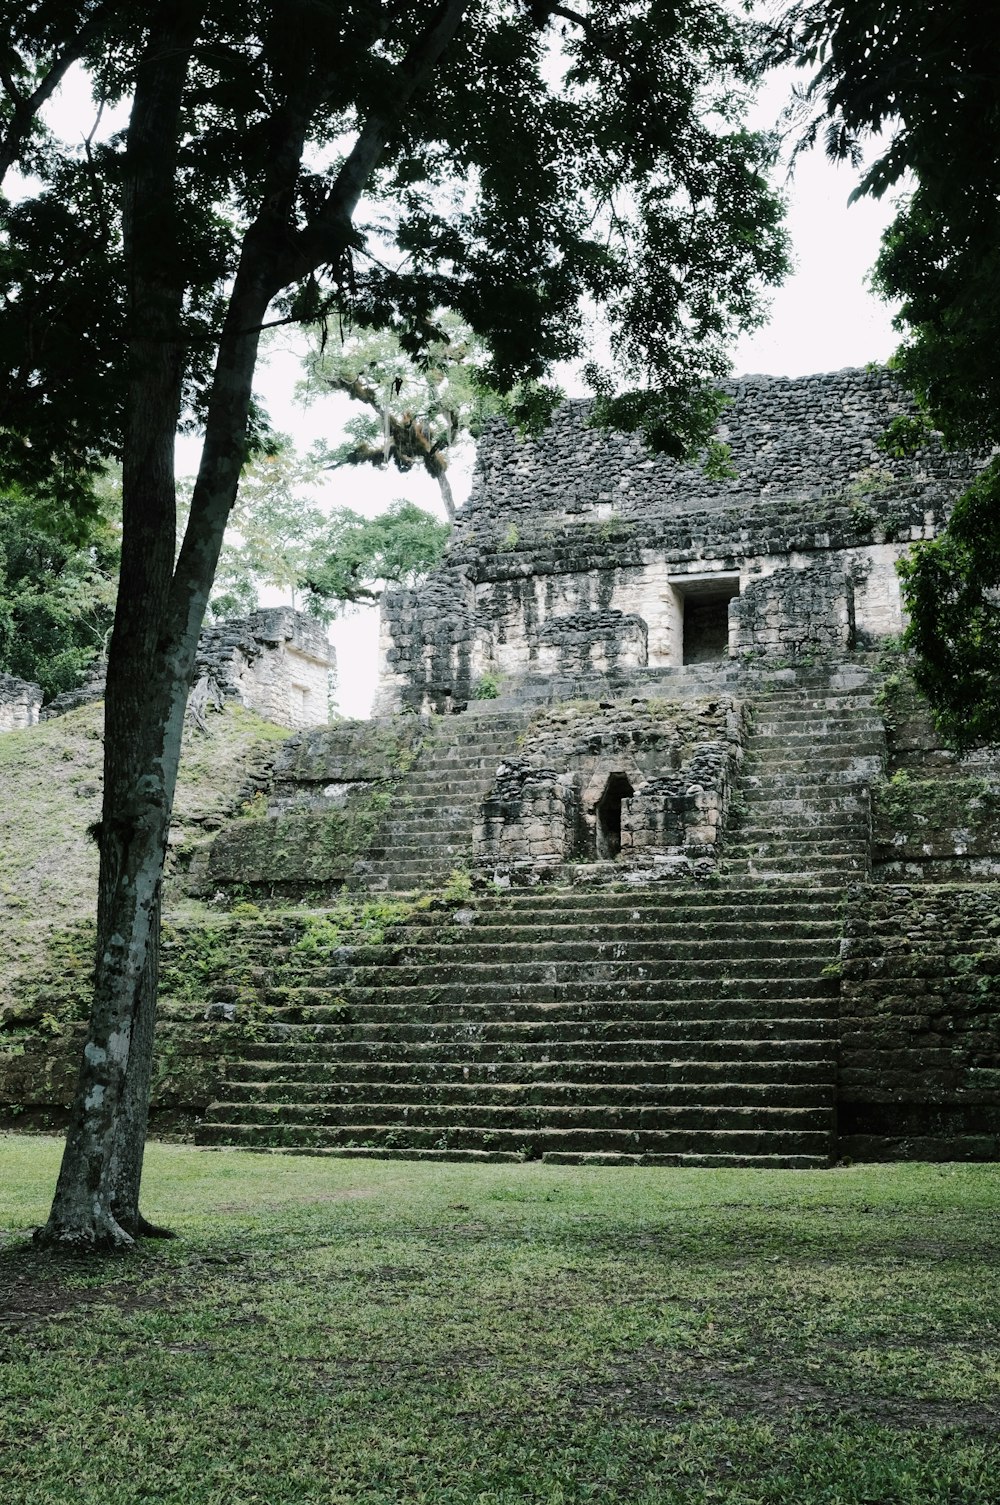 a large stone structure sitting next to a tree